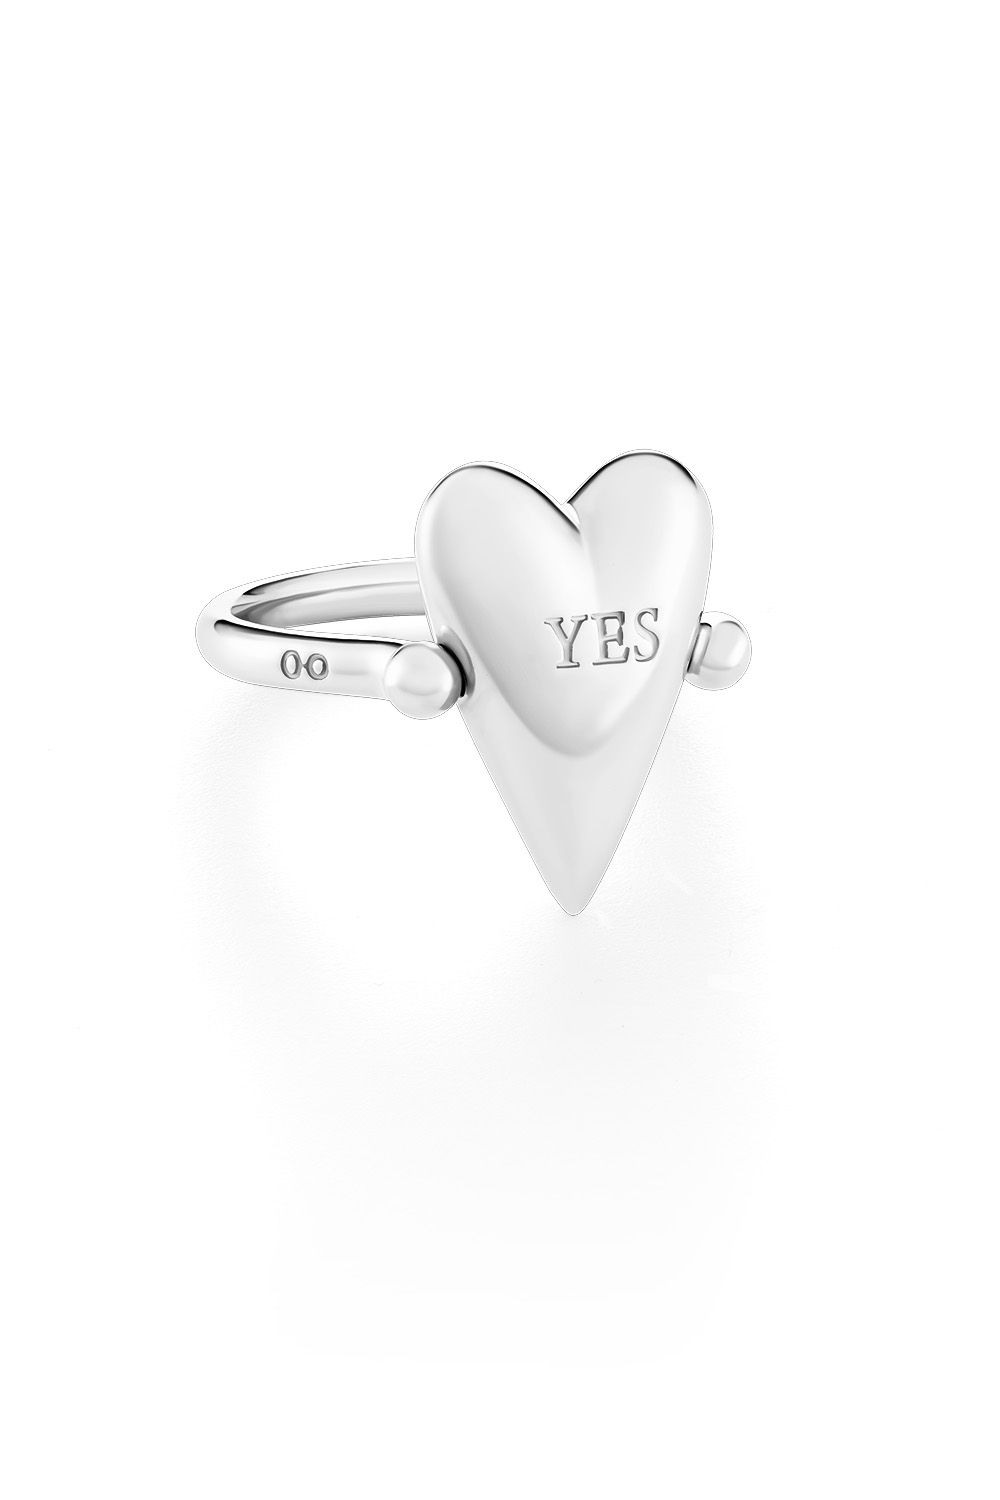 Propose your loved one with heart ring!!